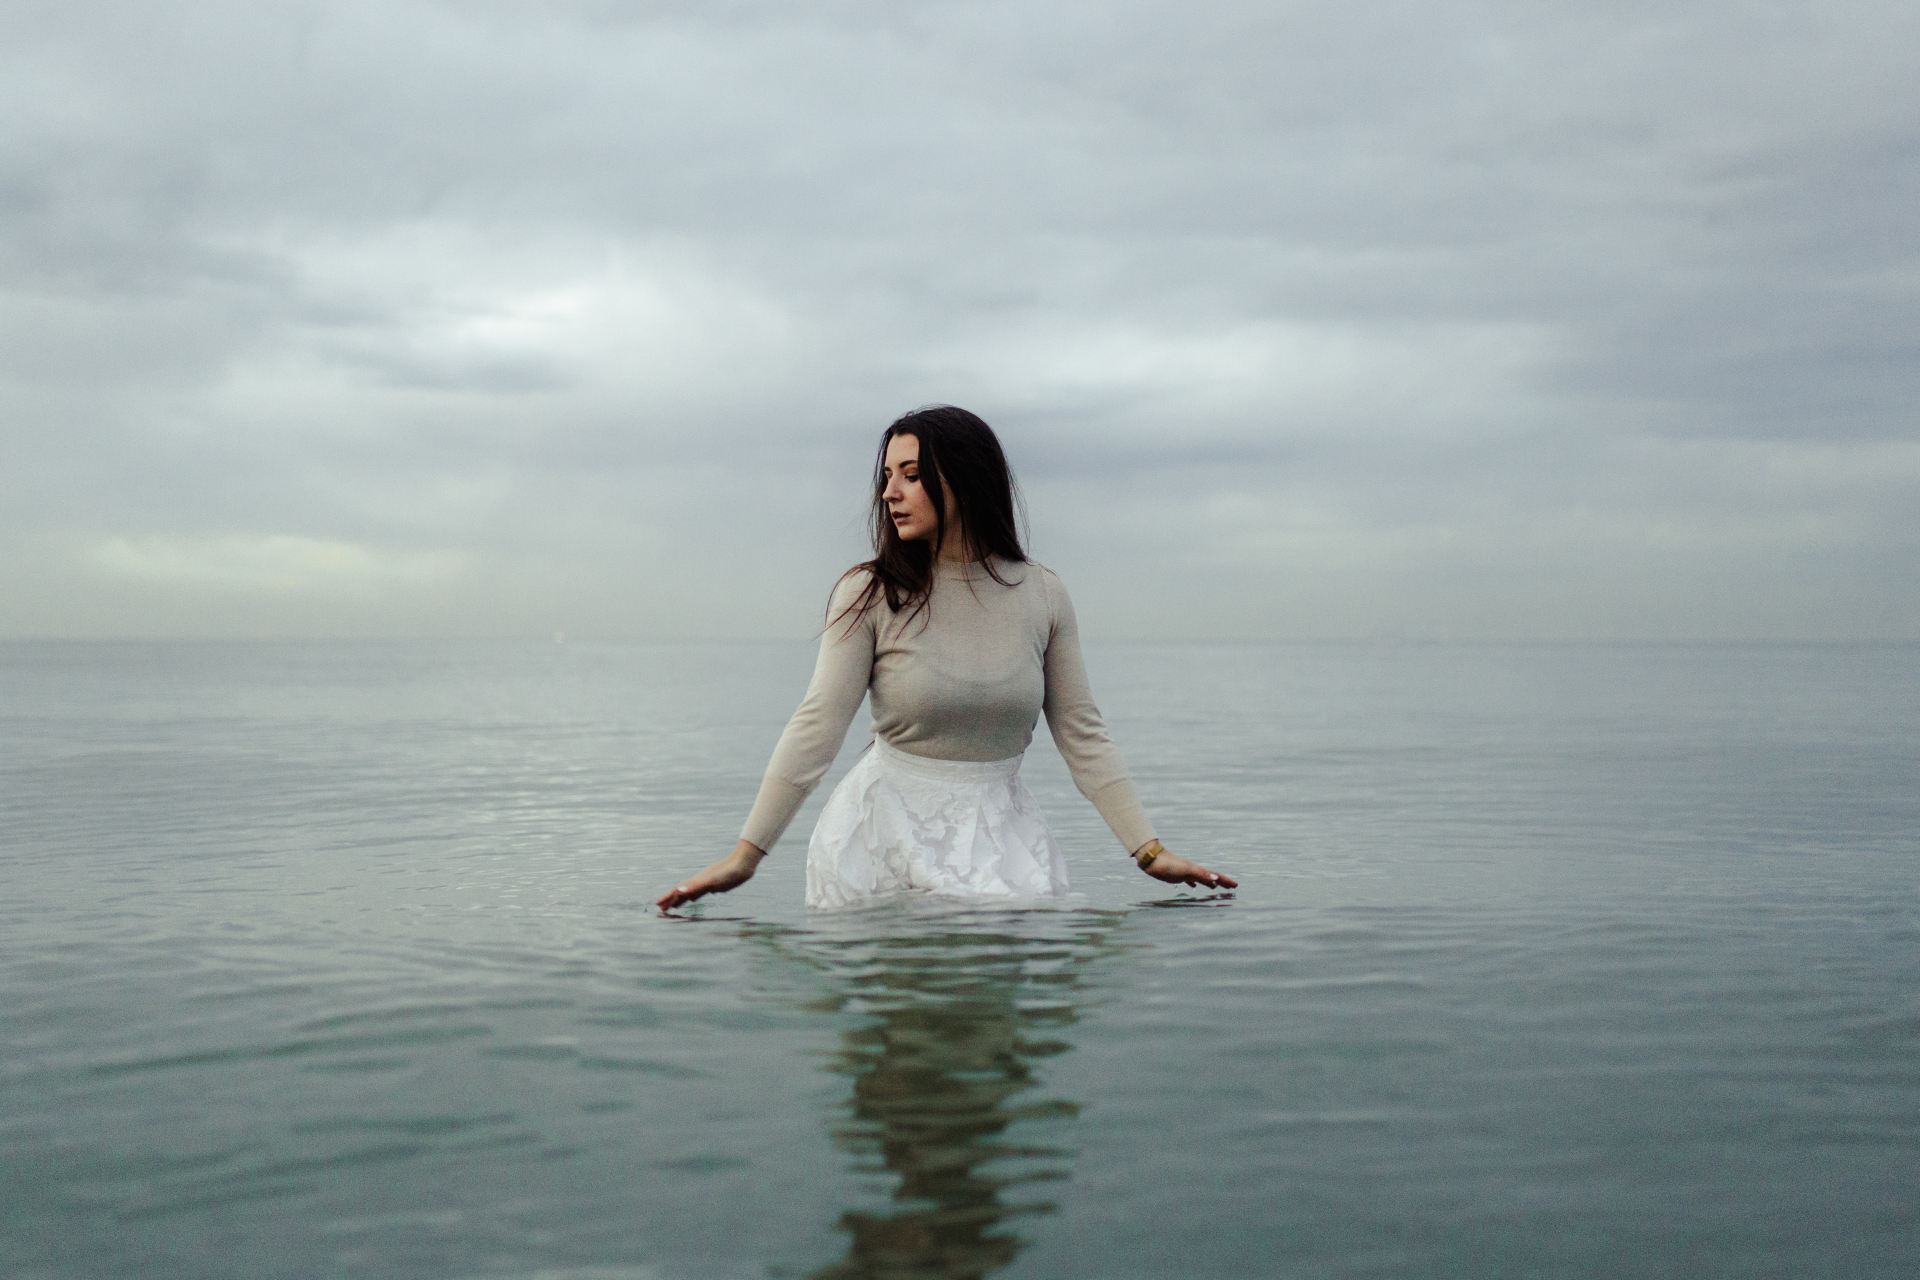 woman in white dress standing on water